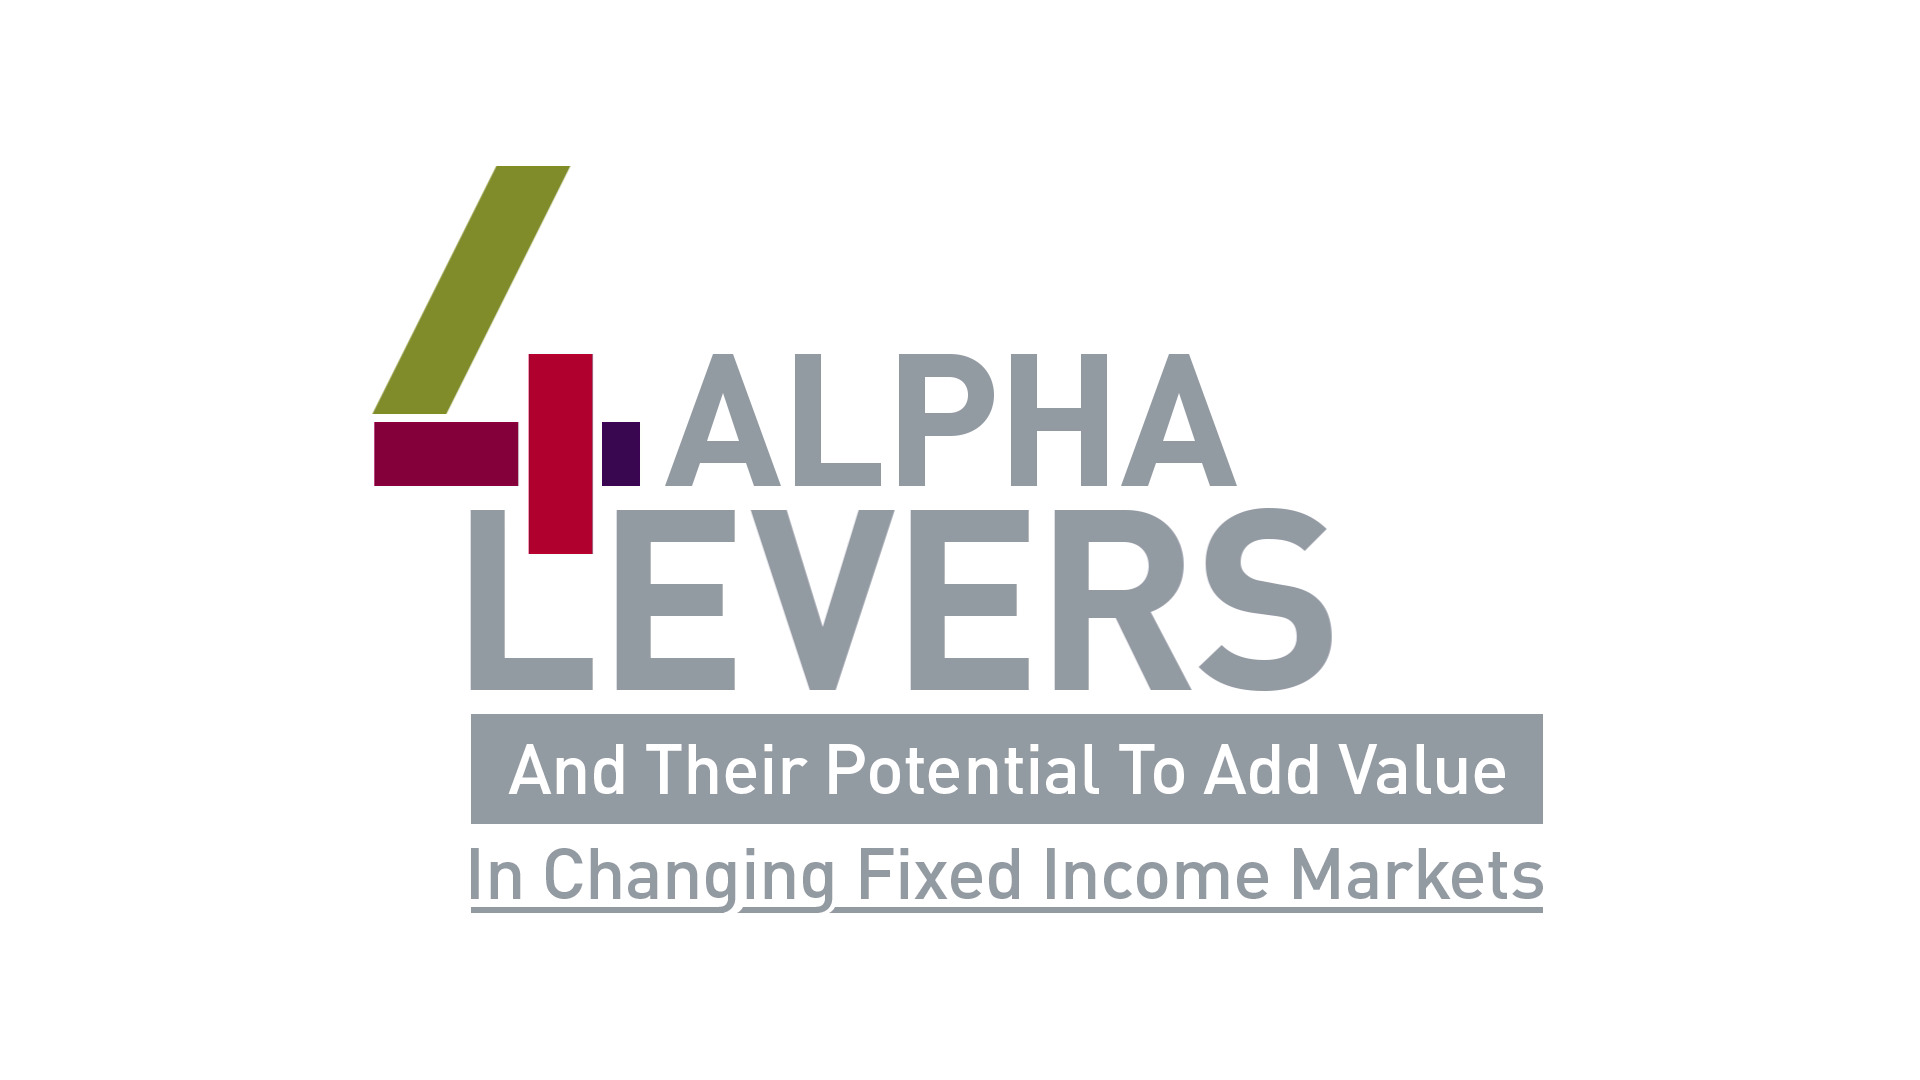 Four Alpha Levers – and their potential to add value in changing fixed income markets